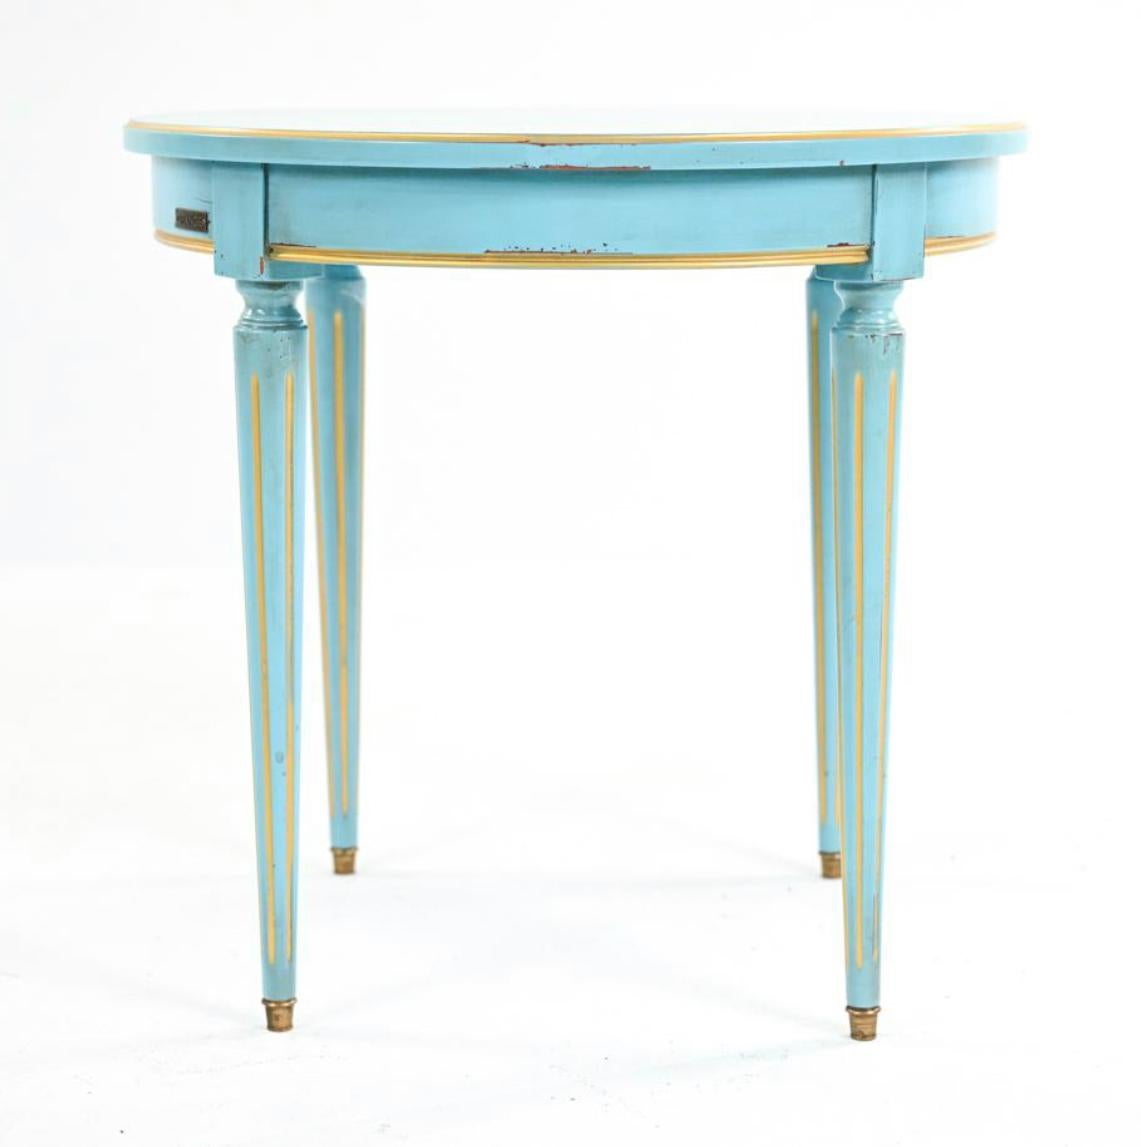 French Provincial Grange Petite French blue gold-leafed side table, Fluted Legs. 

Petite French blue and gold leafed side table with fluted legs. With Grange plaque on apron and 2005 label underneath. Dimensions: H 21